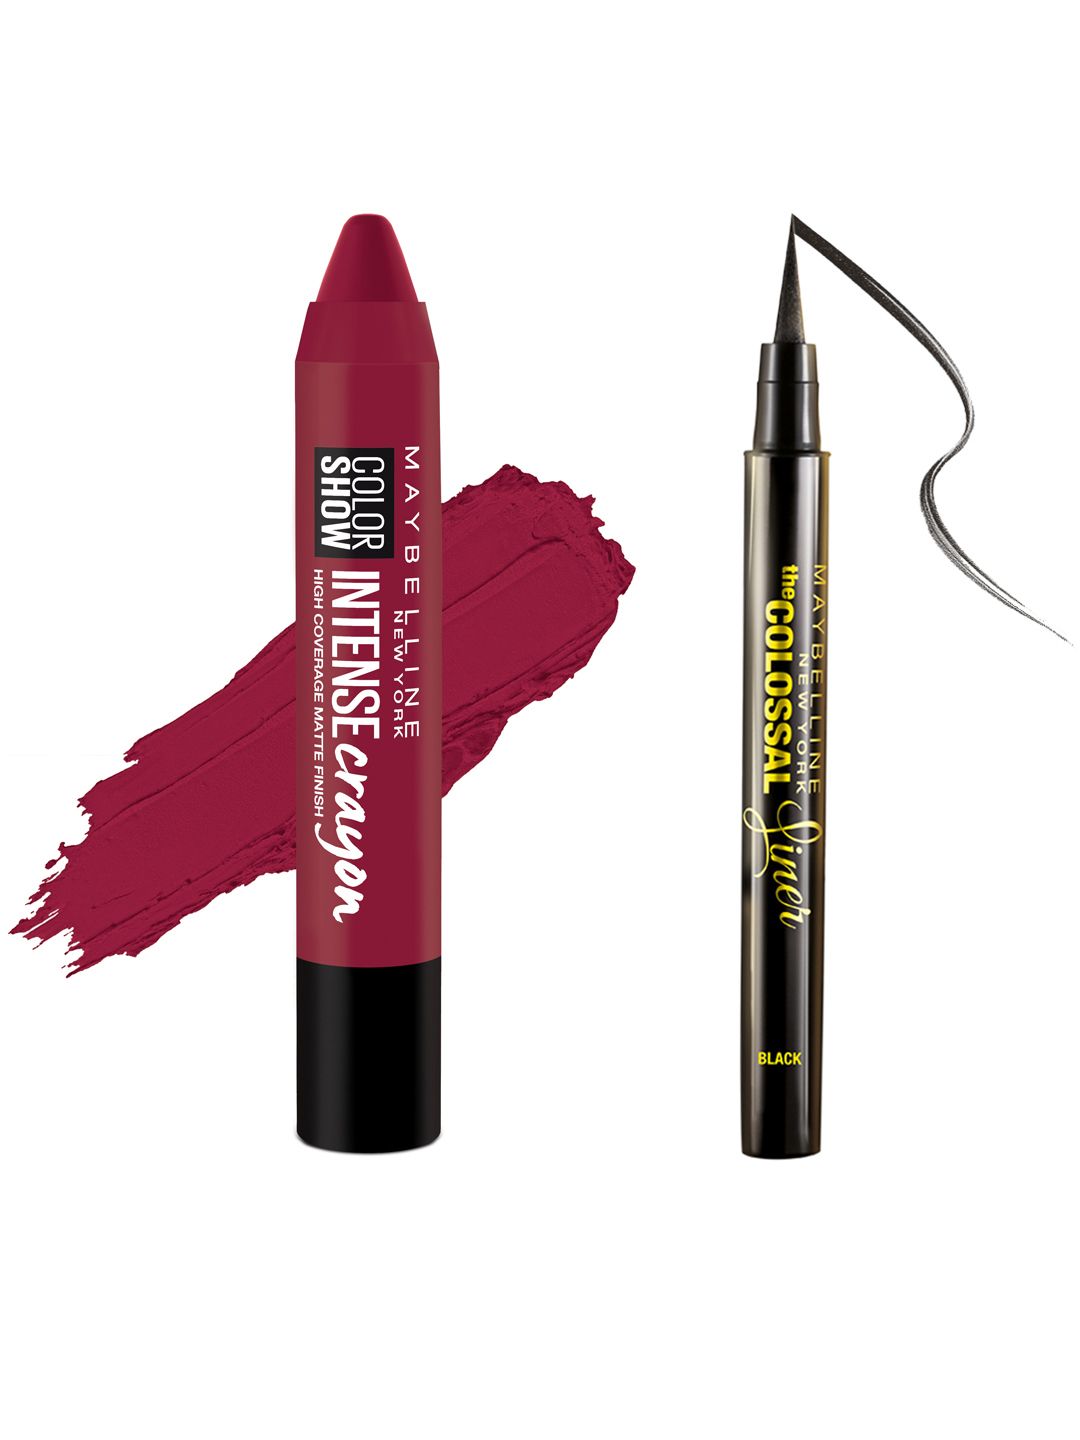 Maybelline The Colossal Liner & Intense Crayon Passionate Plum Lipstick Price in India